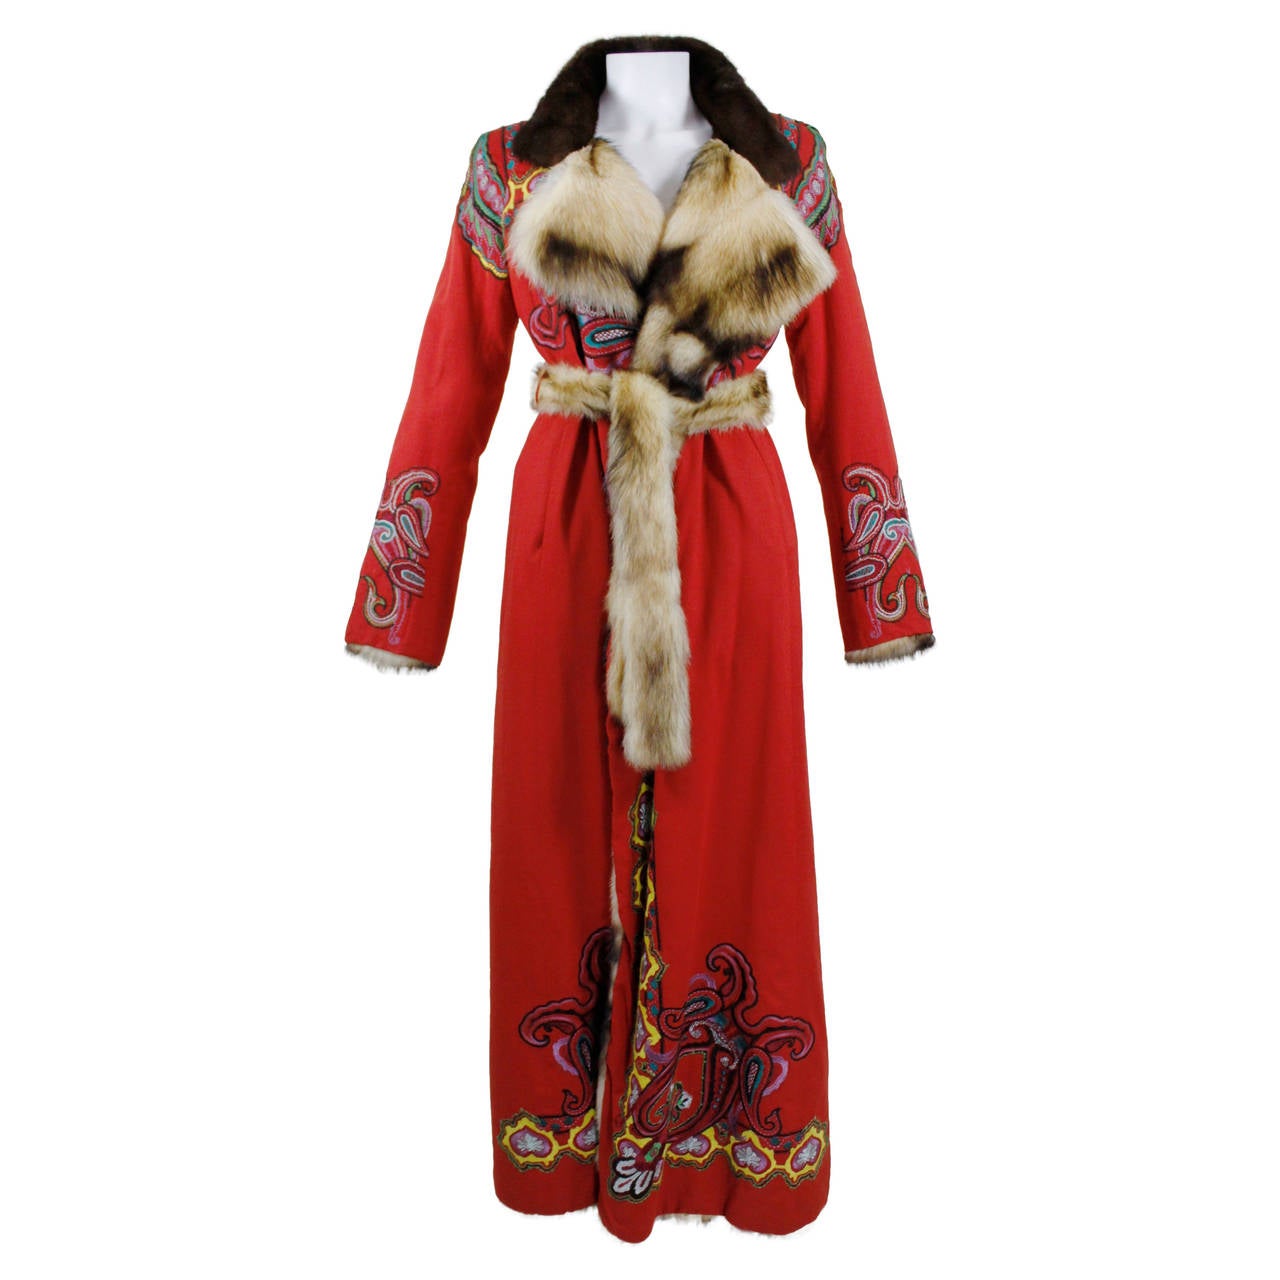 Christian Lacroix Full Length Red Embroidered Coat with Reversible Fur Lining